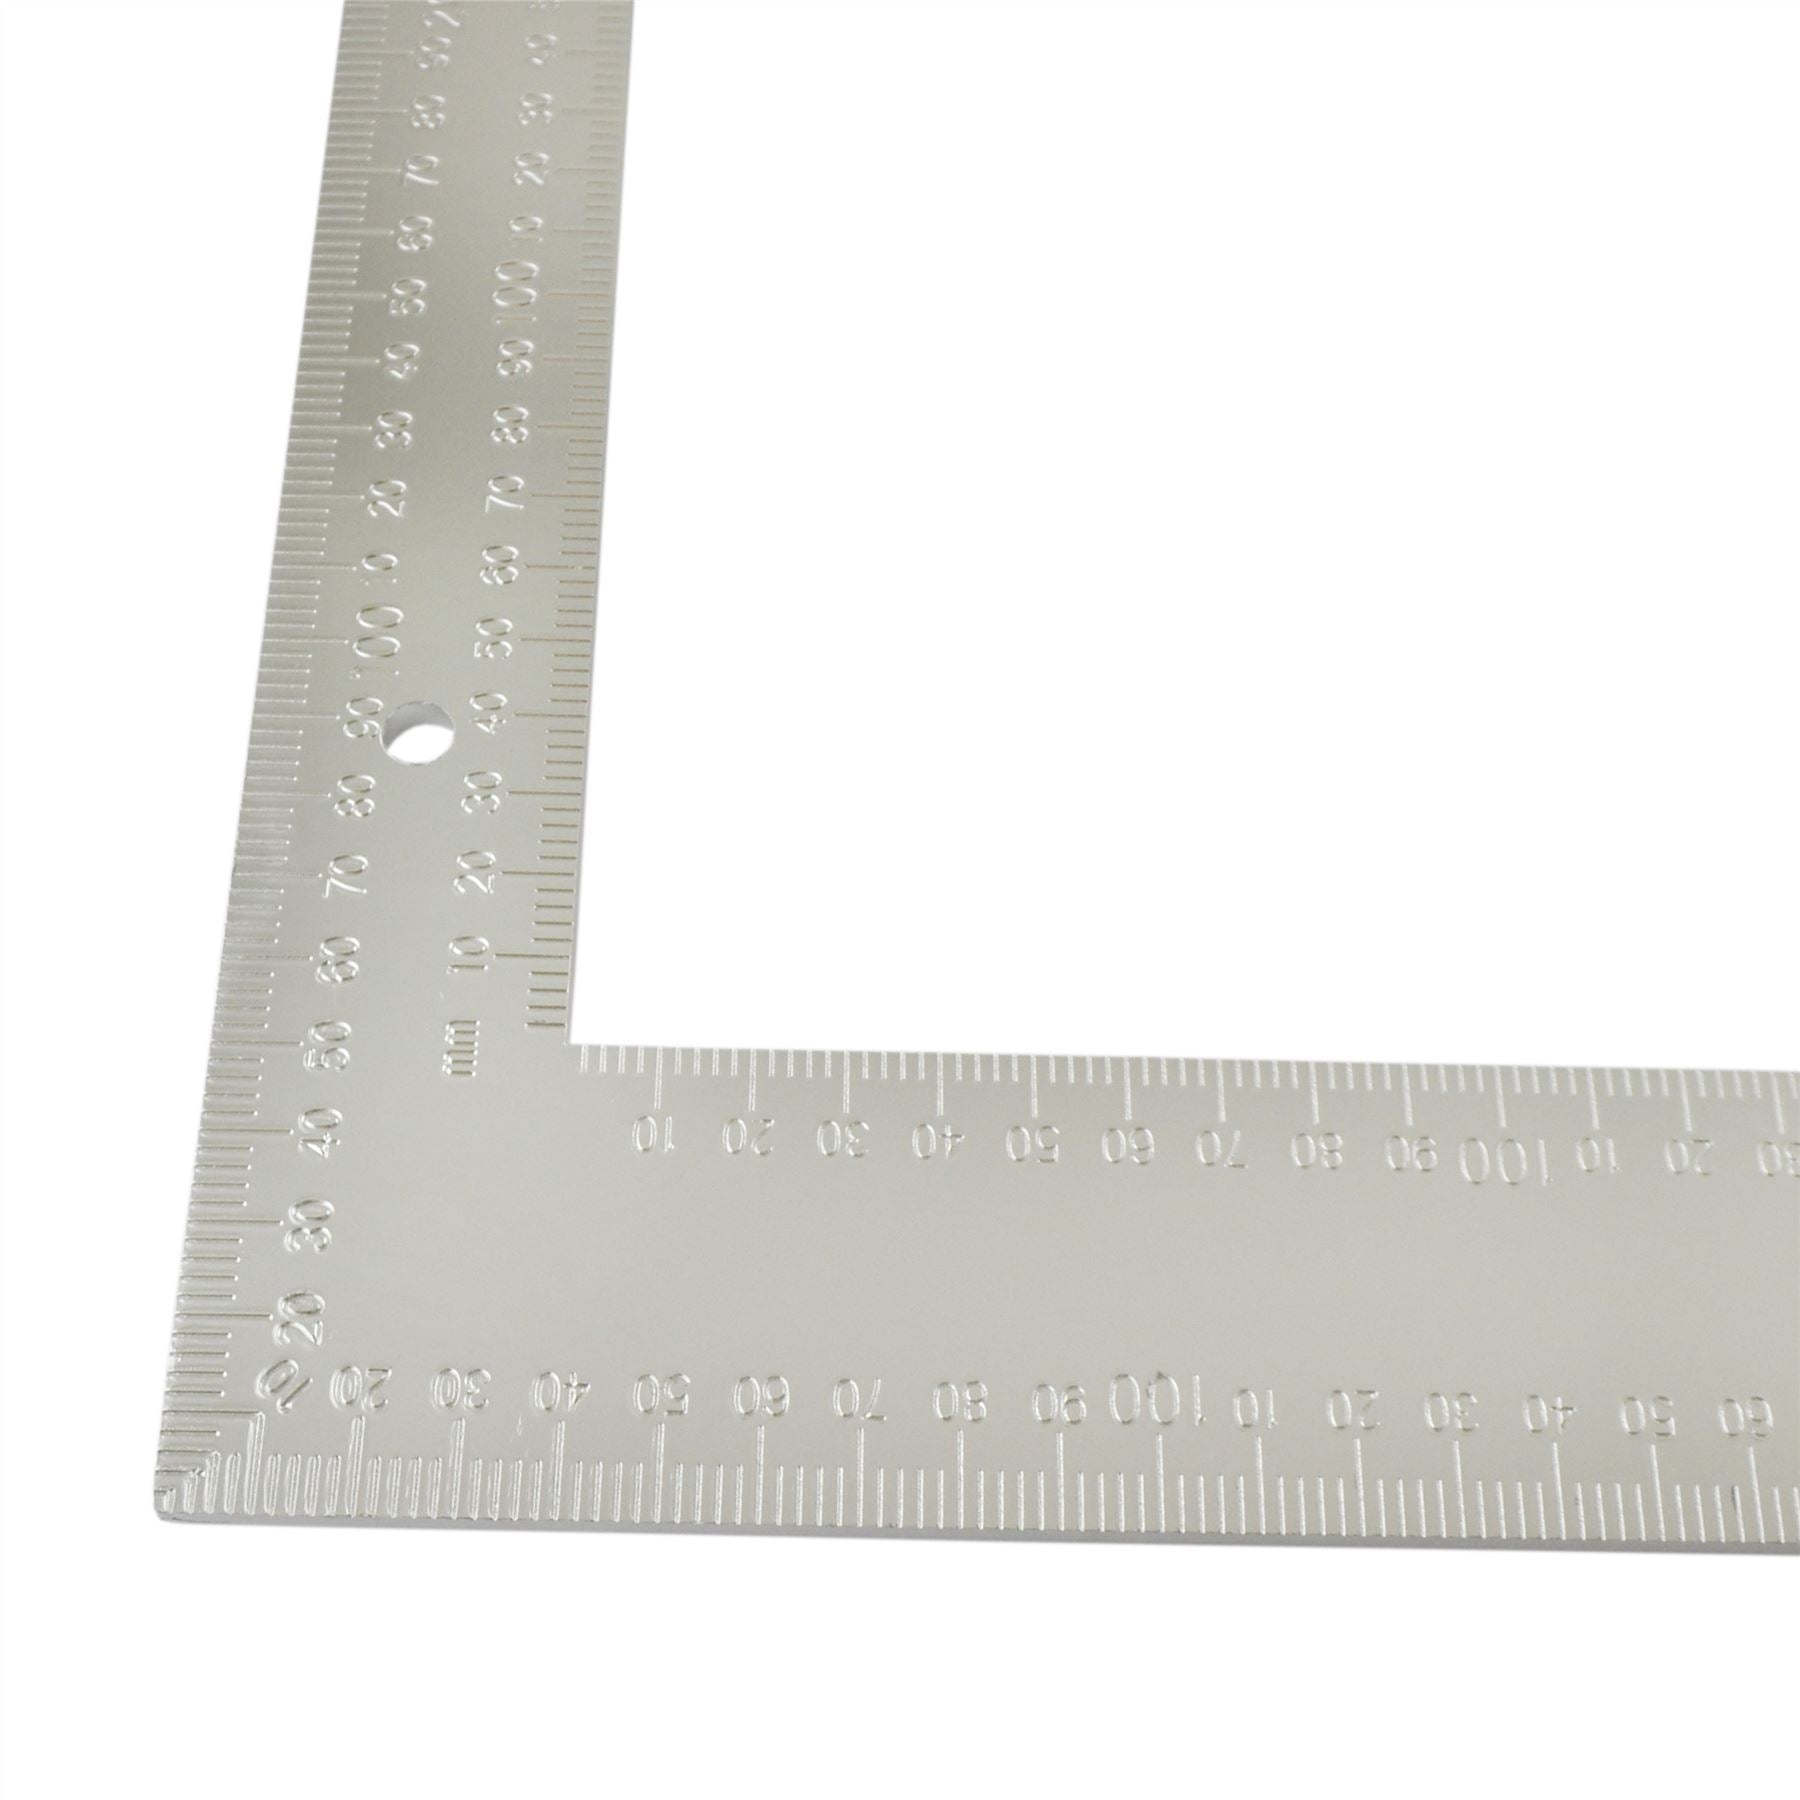 24" x 16" Aluminium Set Speed Square Rafter Metric Imperial Roofing Rule TE841